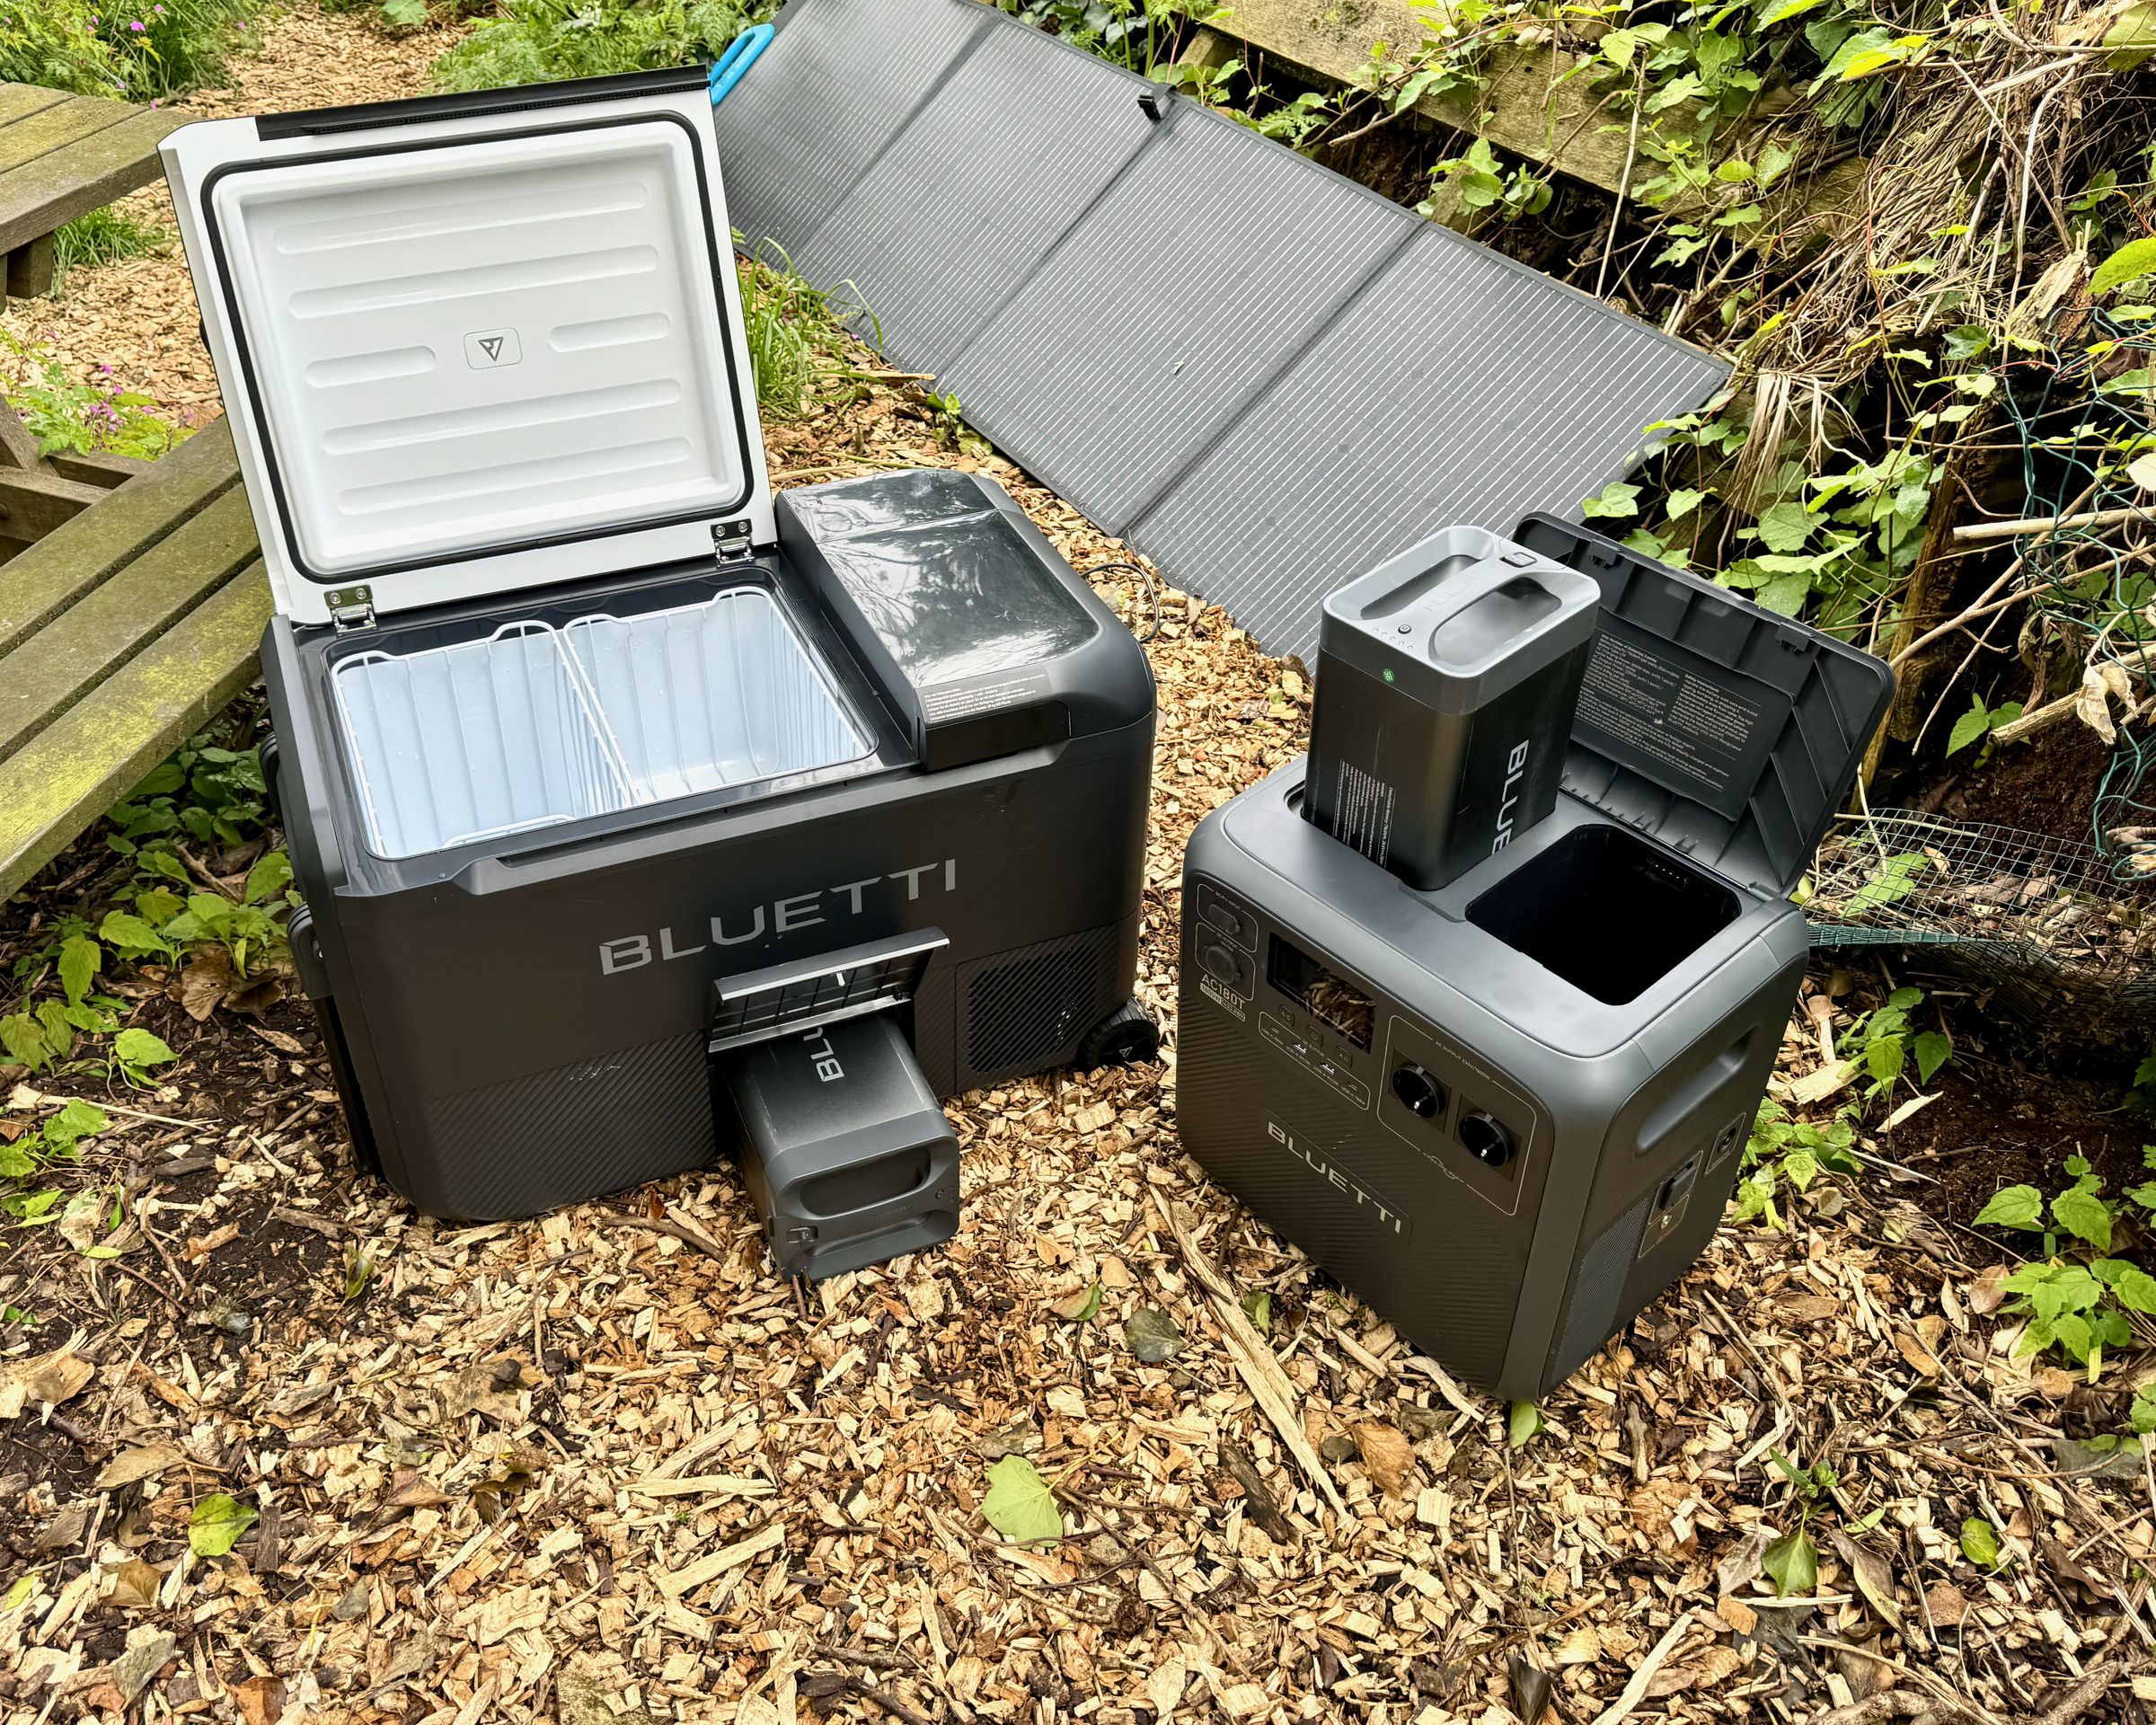 The Bluetti MultiCooler and AC180T solar generator sitting in a park next to a picnic table with a solar panel in the background.